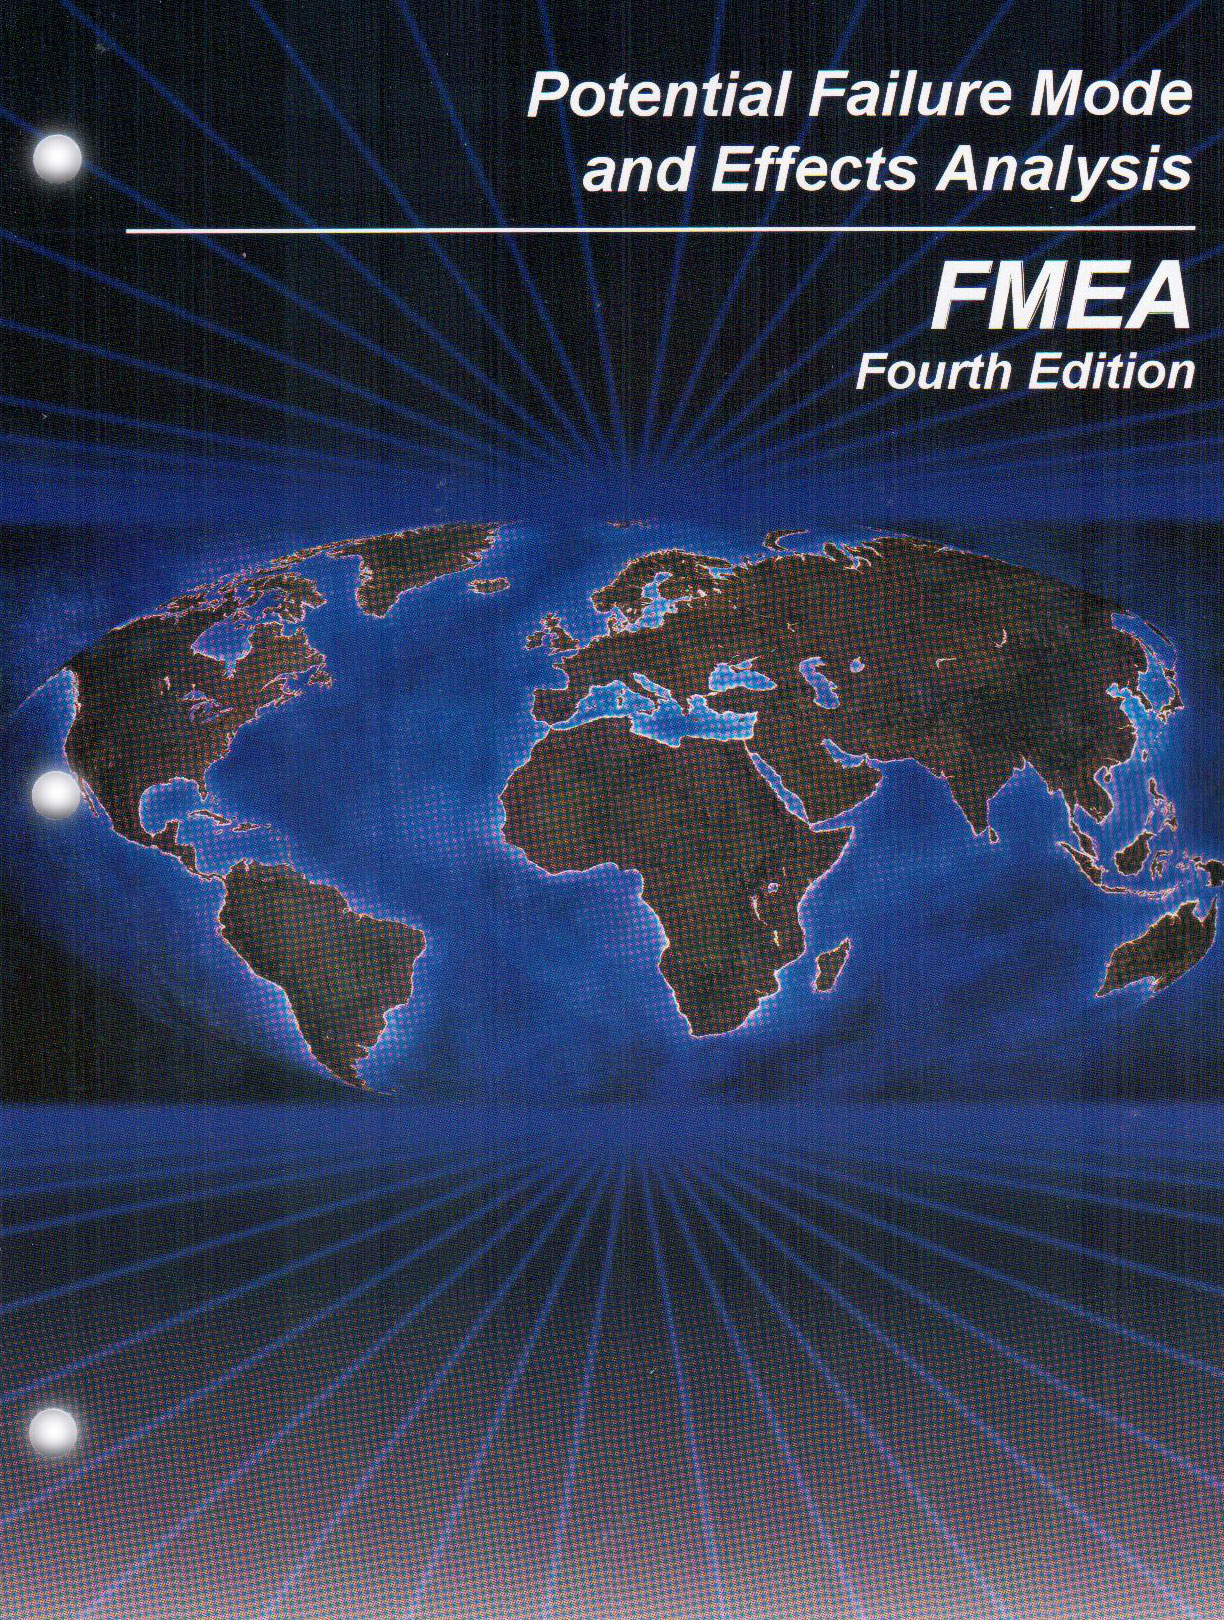 Ford fmea handbook requirements #6